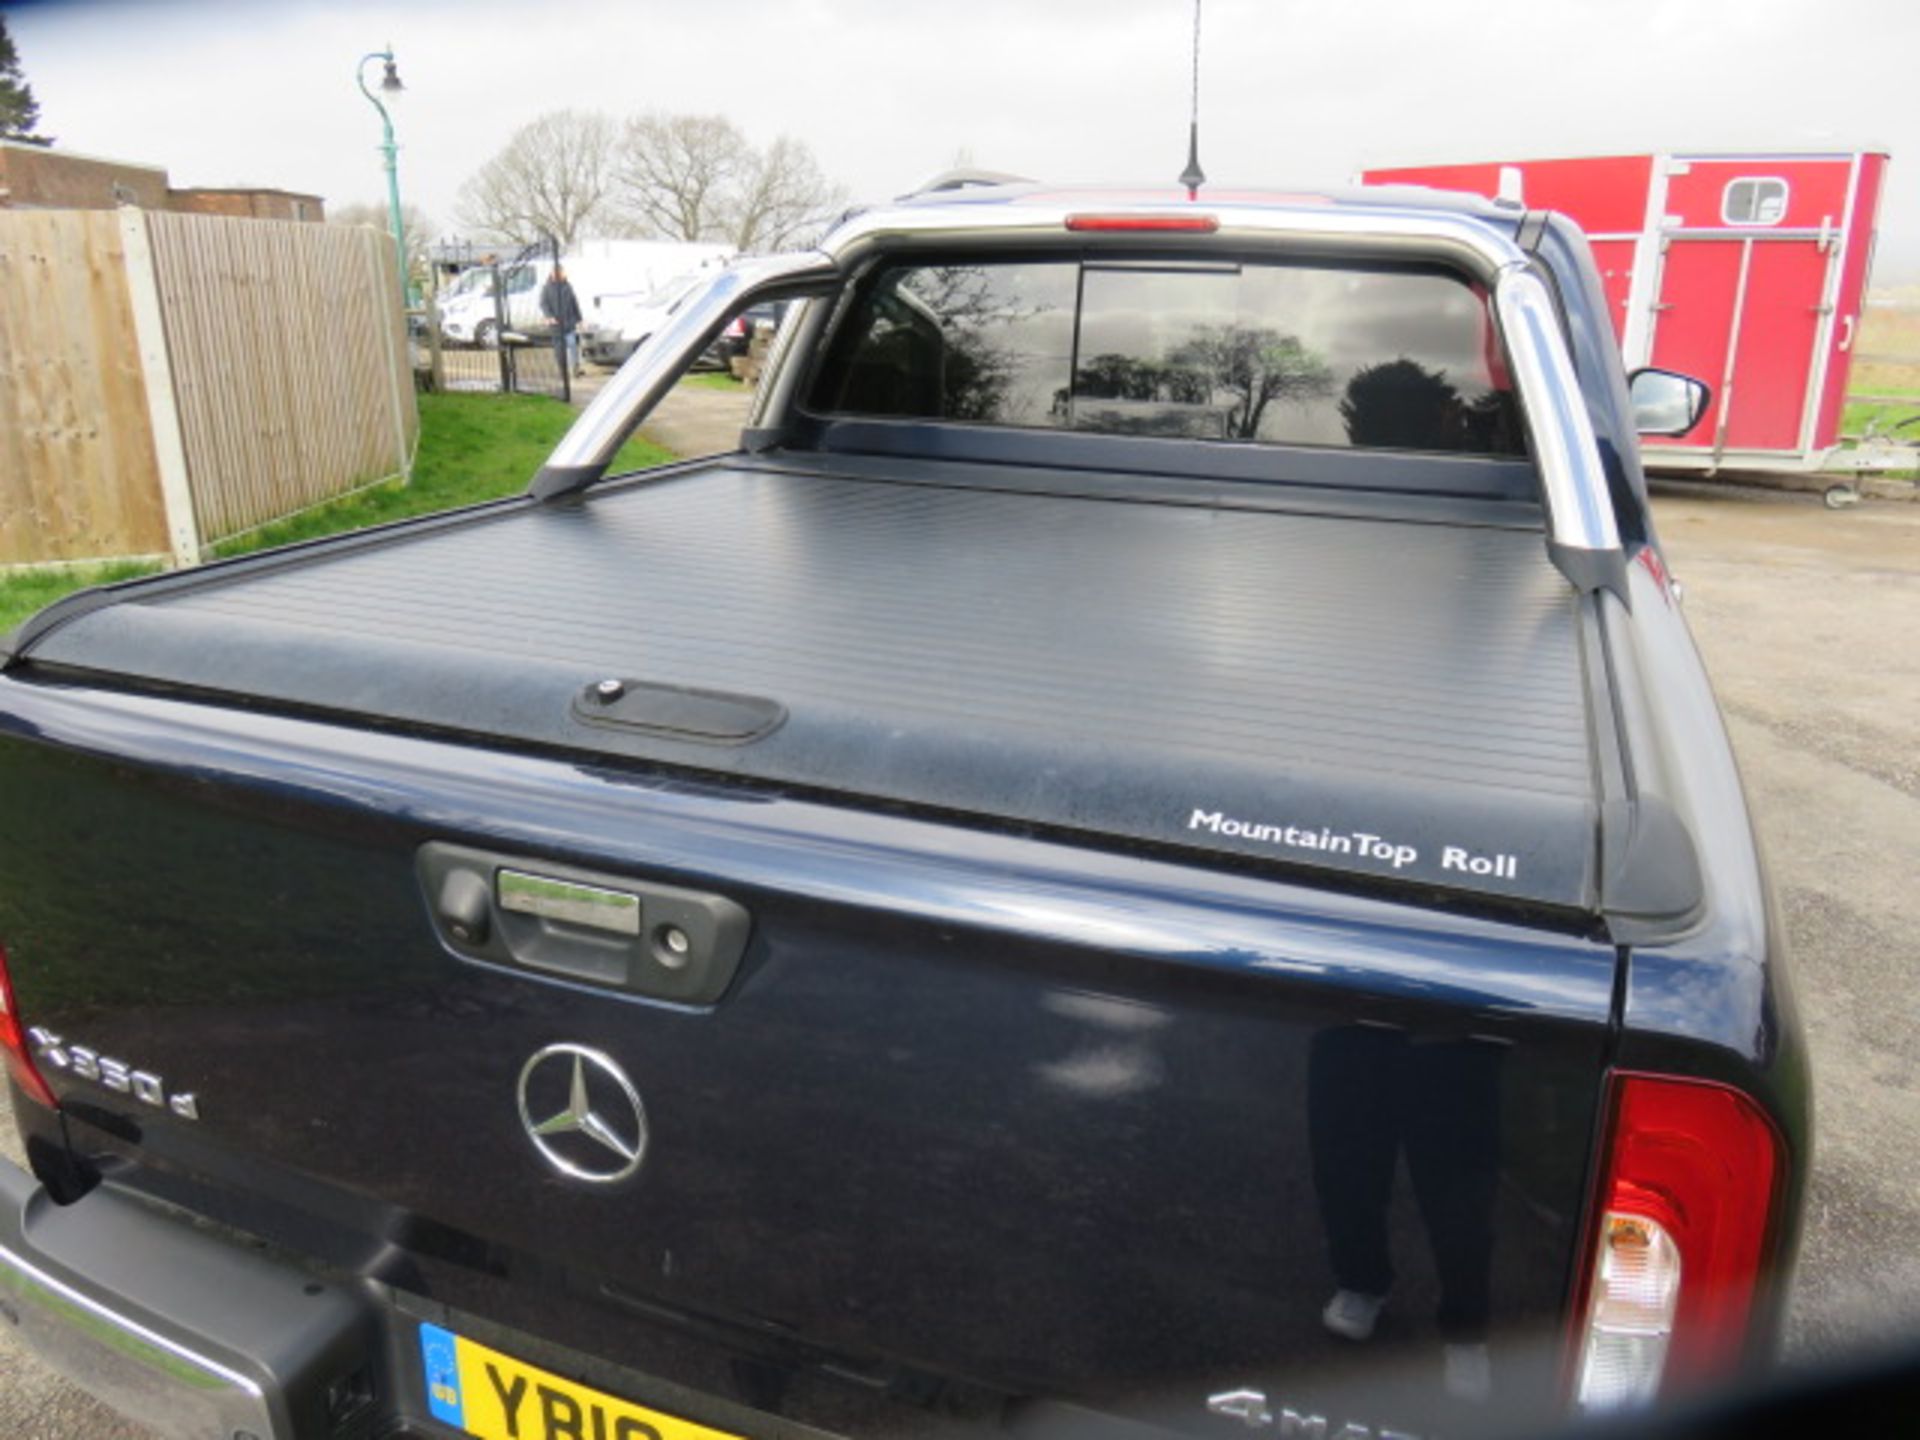 1 Mercedes Benz X-350 Power D 4MATIC 3.0 Diesel Pick Up - Image 8 of 13